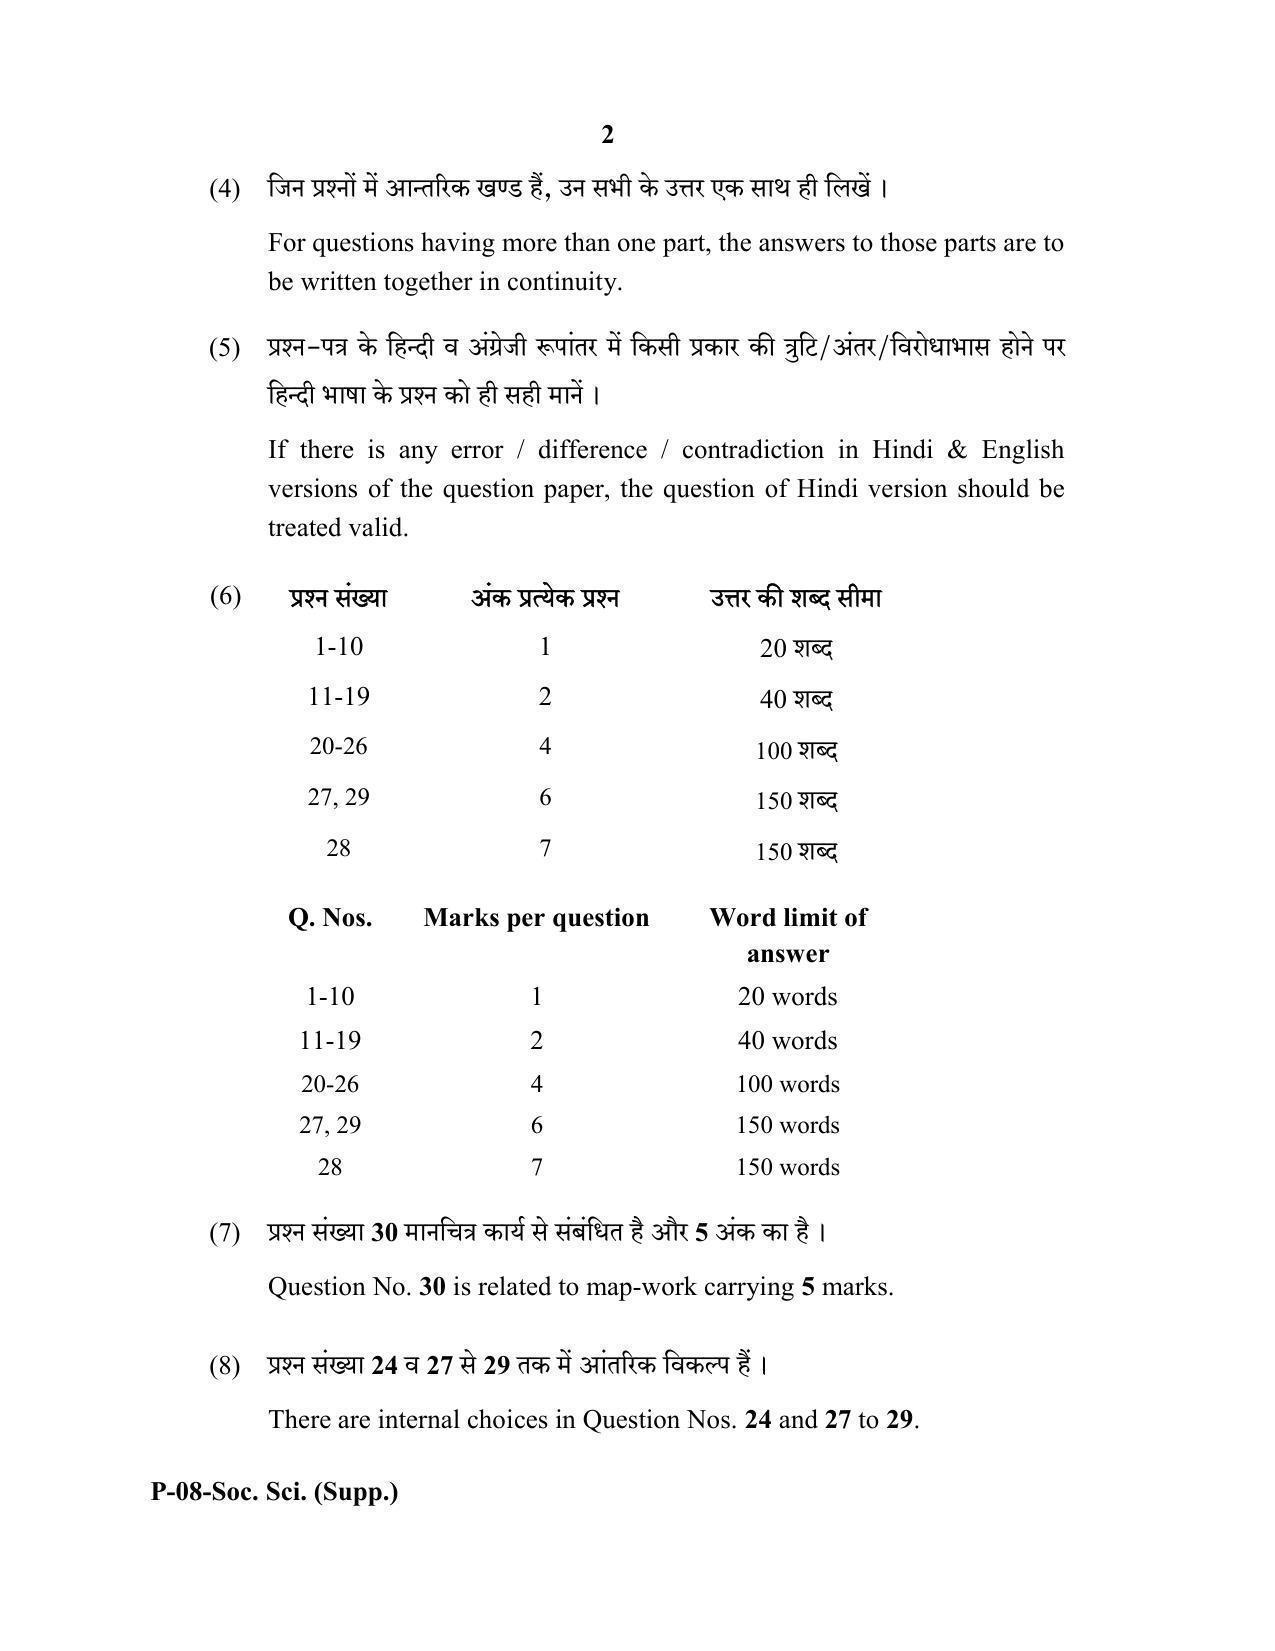 RBSE 2020 Social Science  (SUPPLEMENTARY) Praveshika Question Paper - Page 2